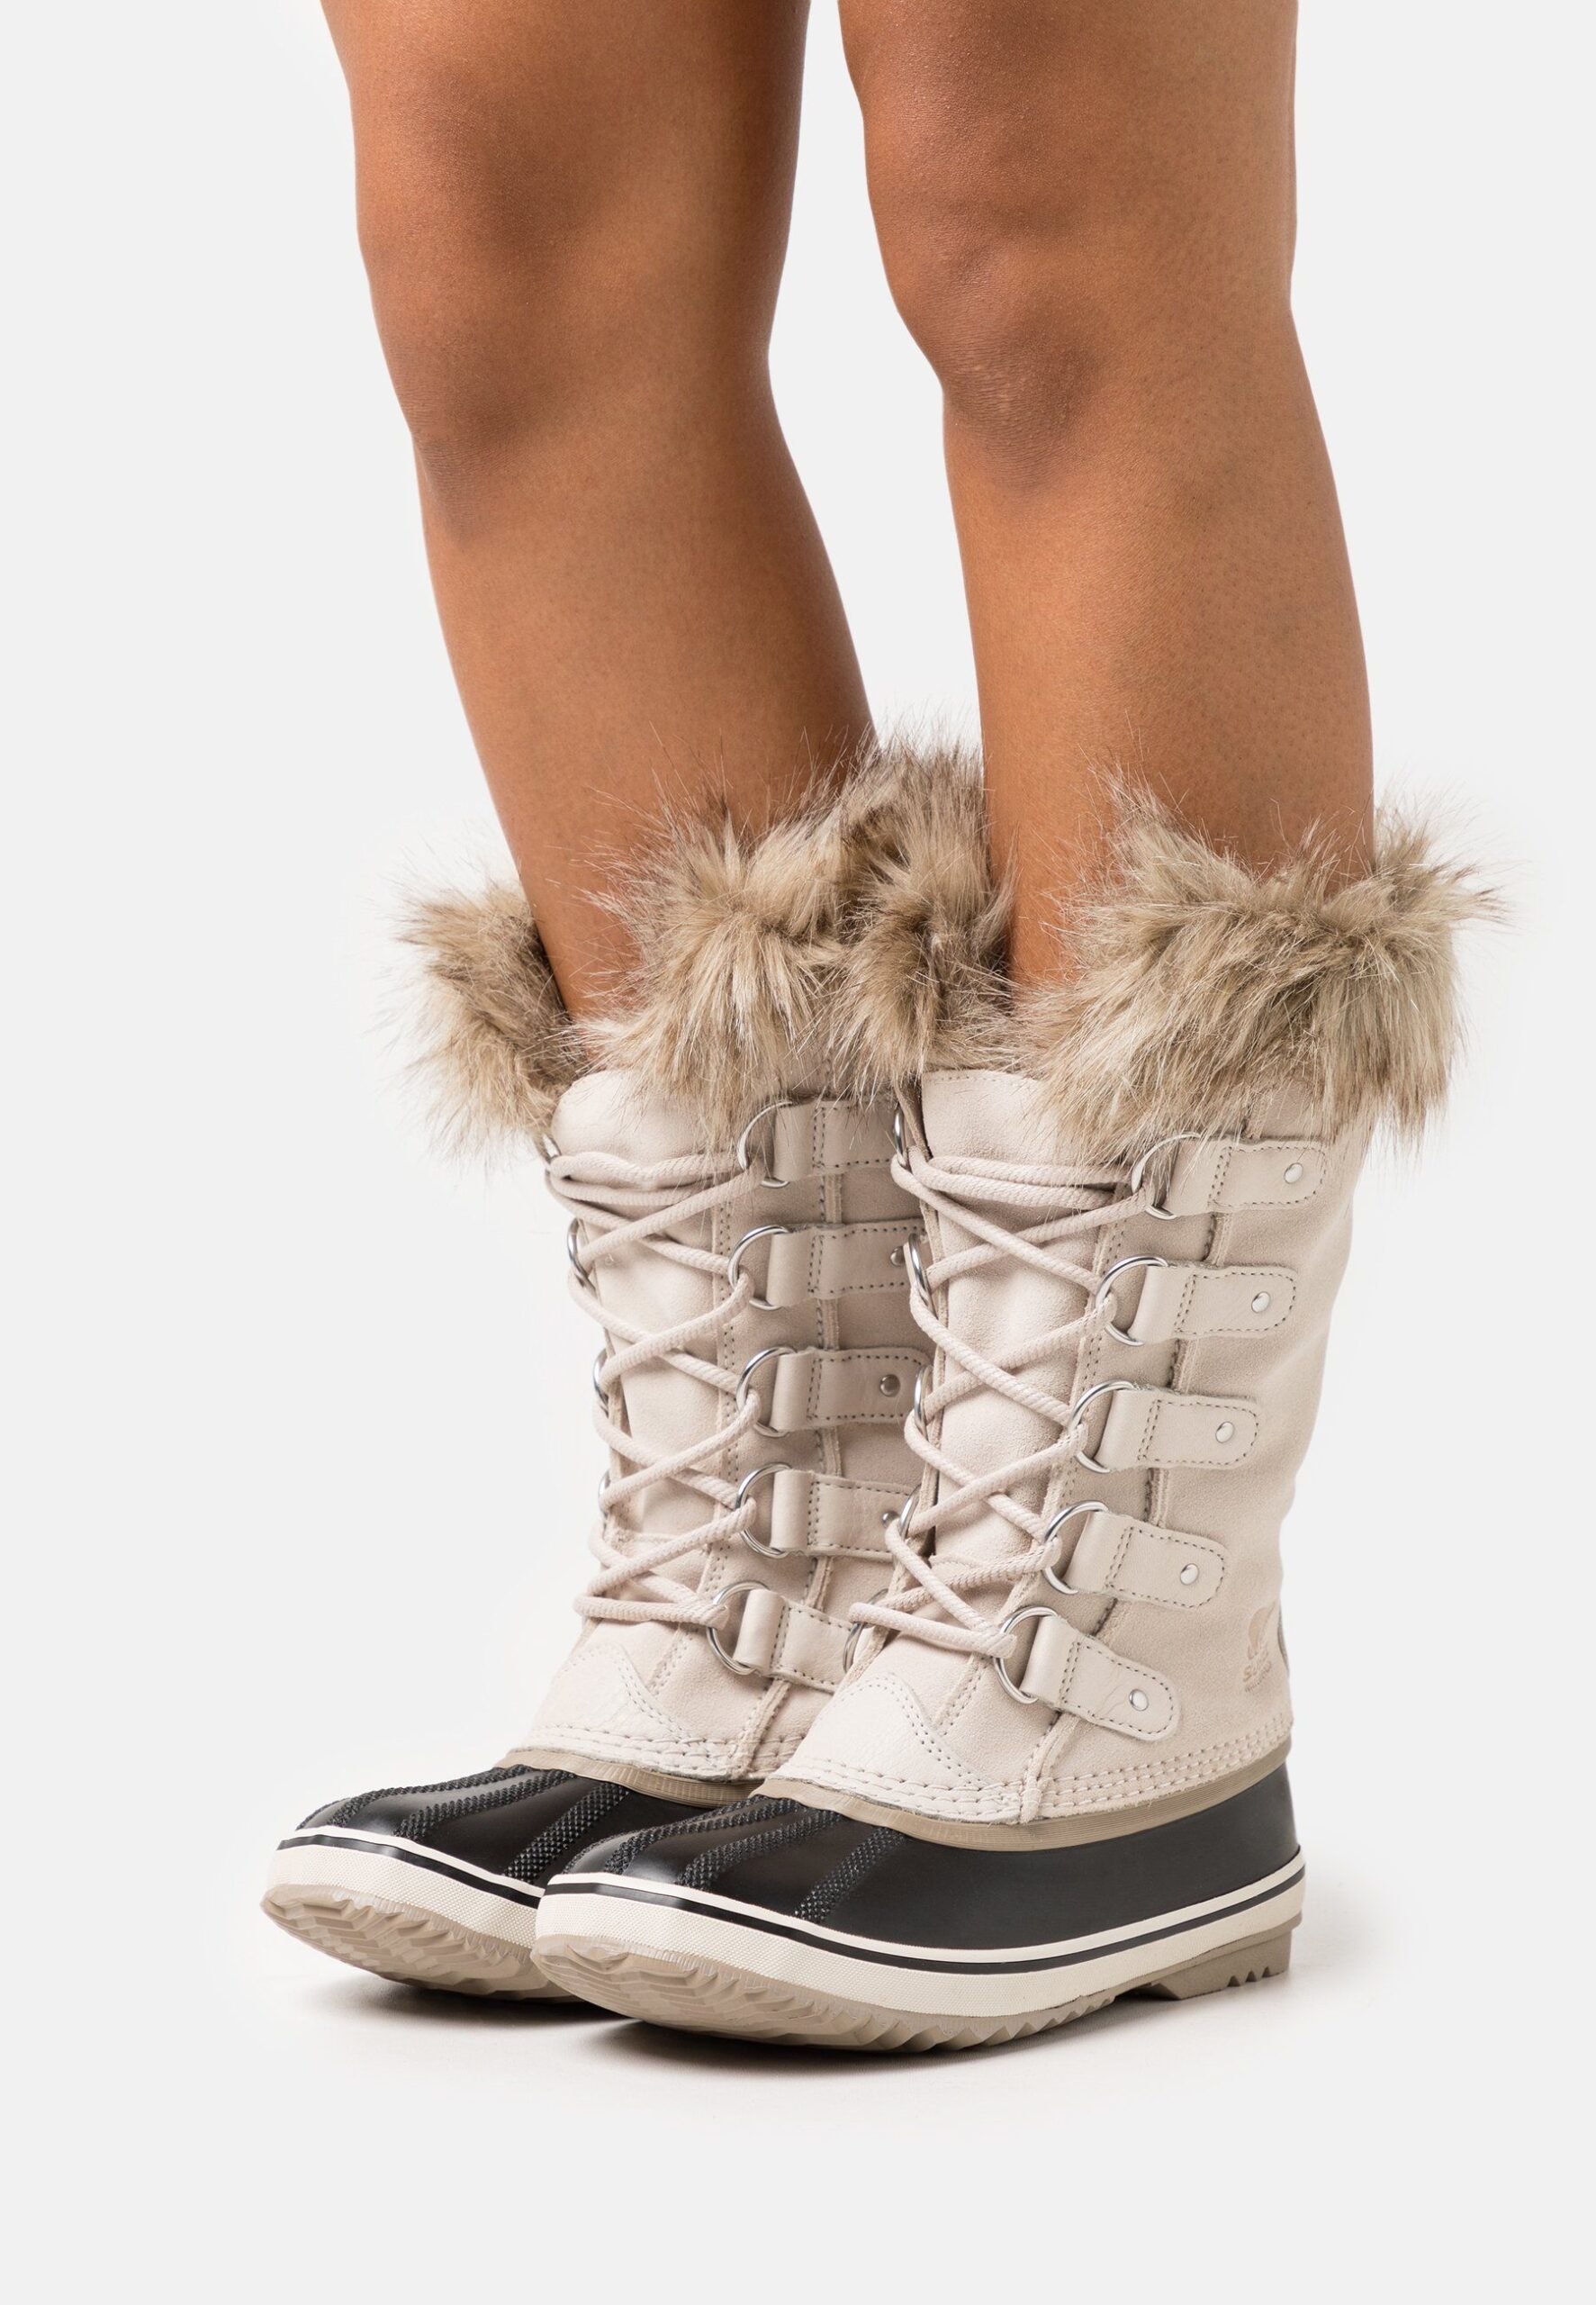 Tips for Styling Sorel Joan of Arctic
Boots